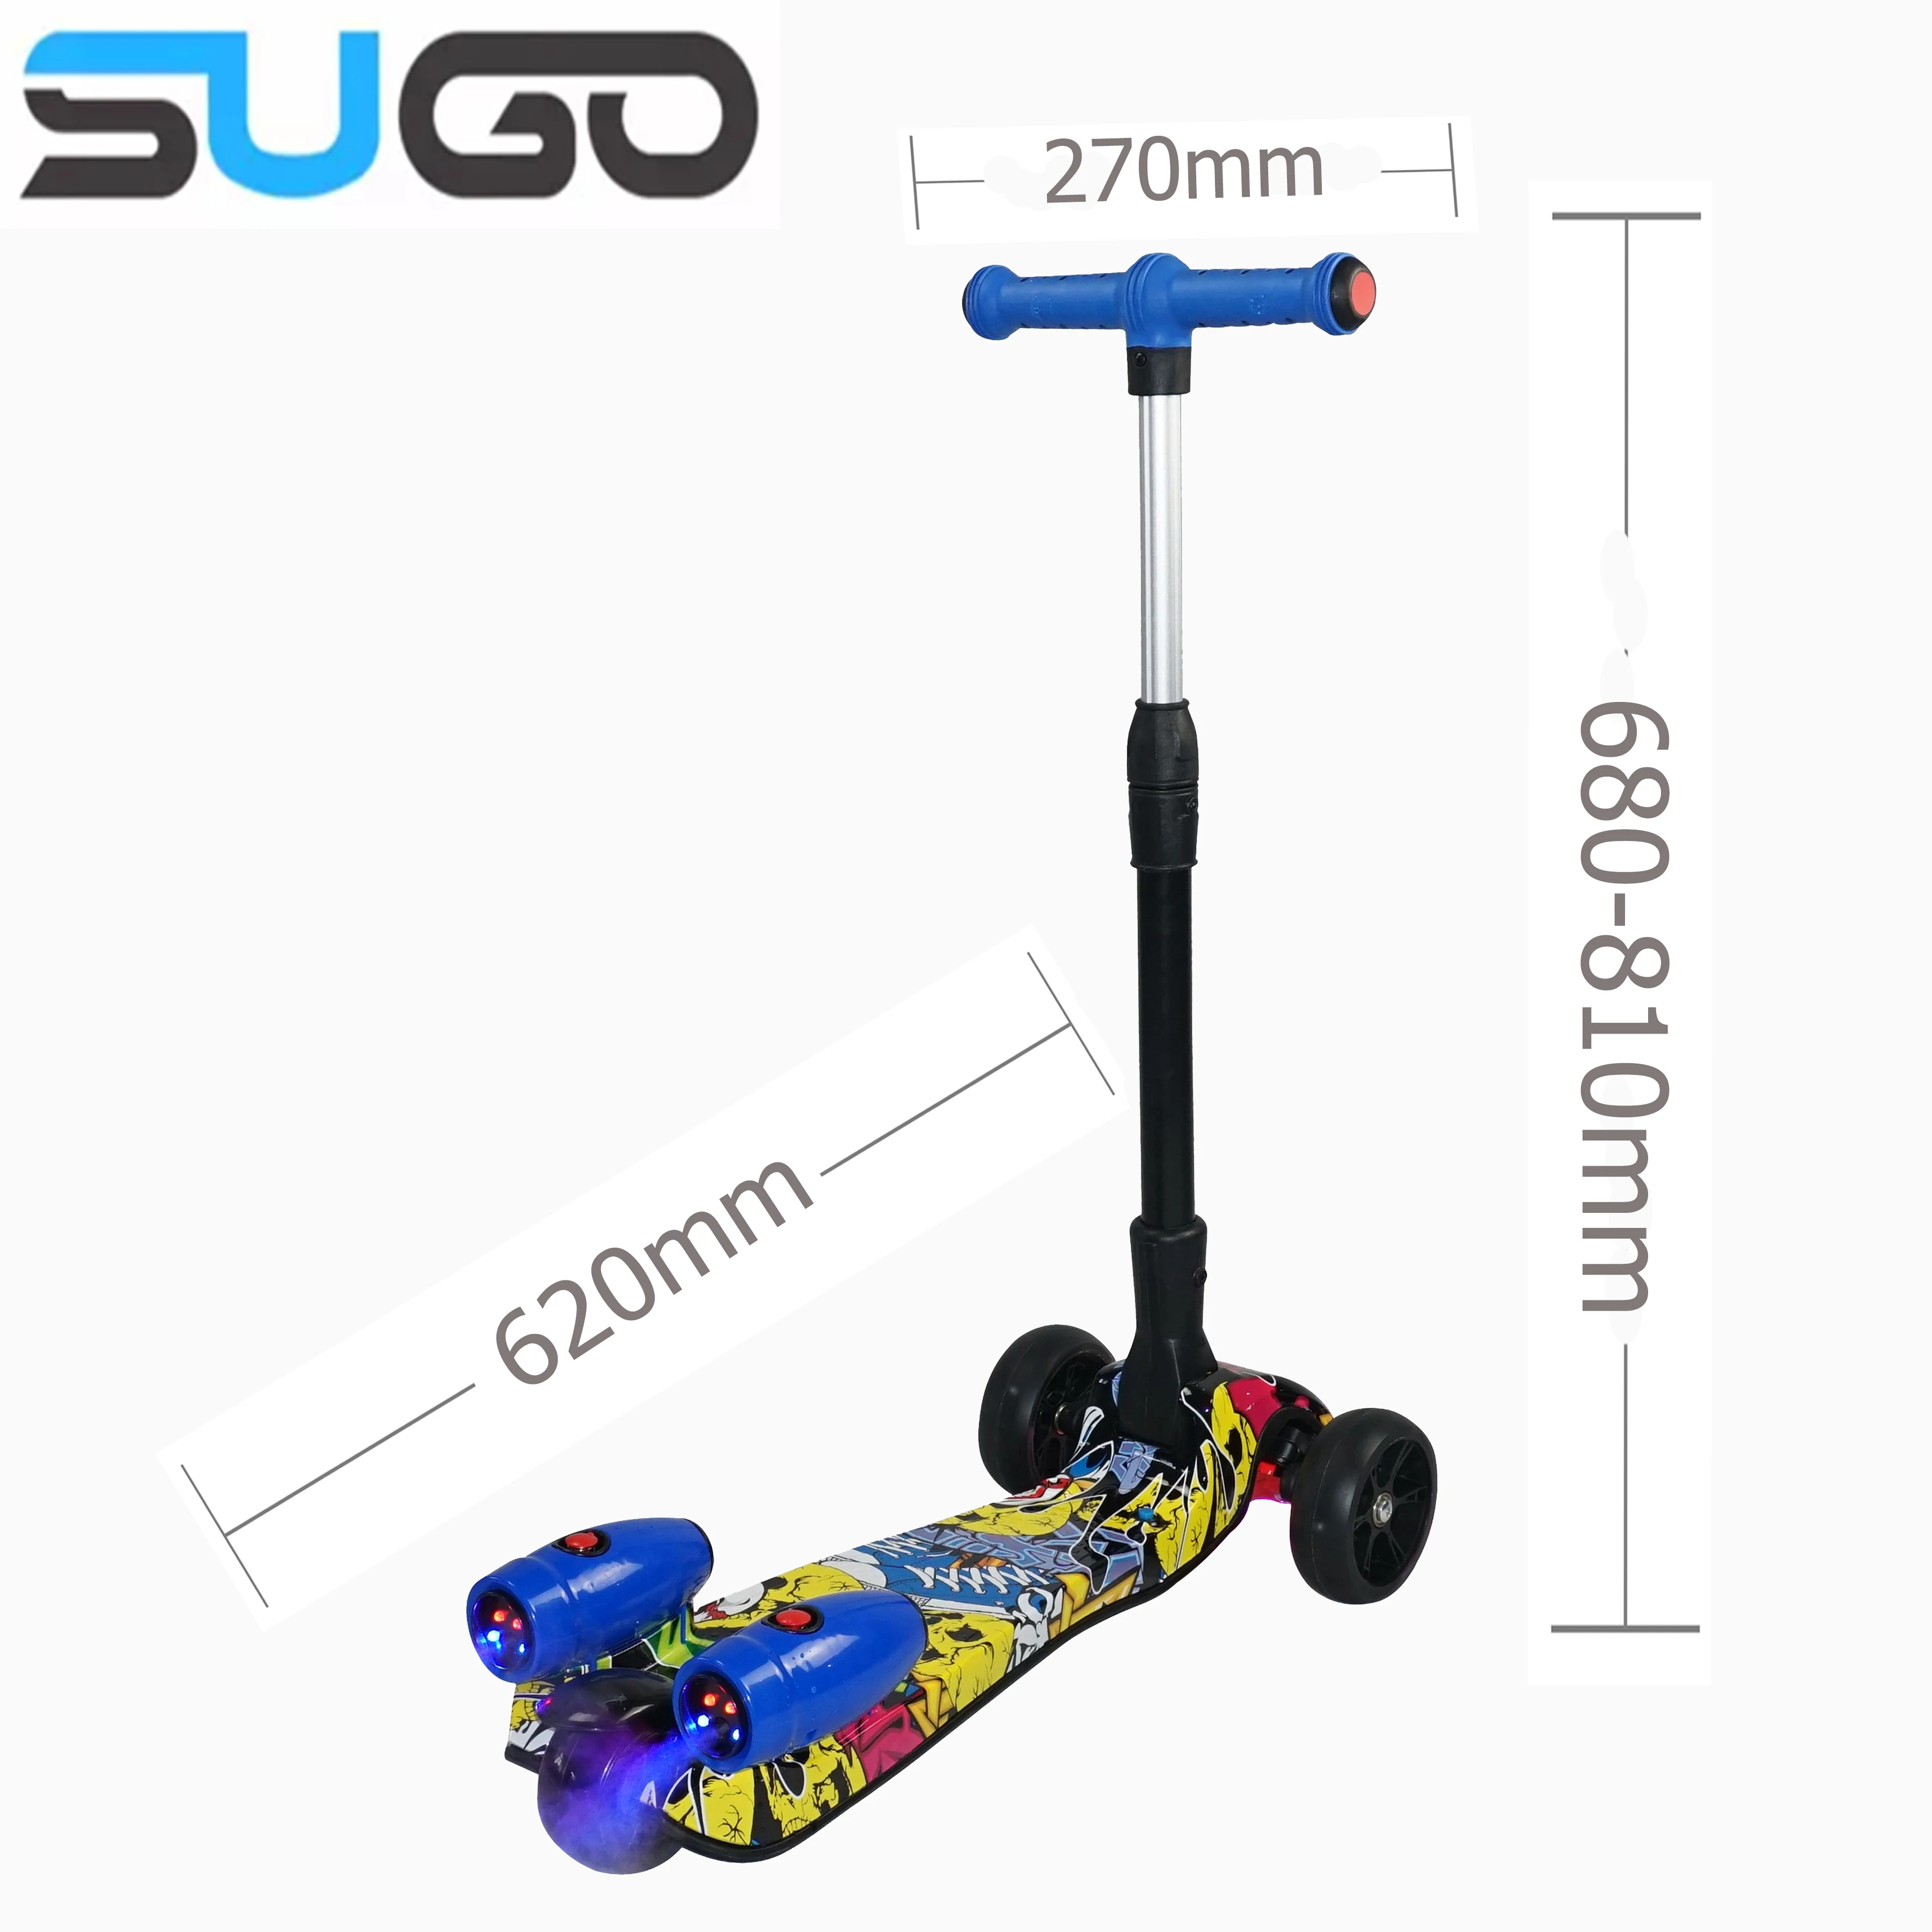 Factory hot sales three wheel foldable kick scooter with spray and light  kids scooter